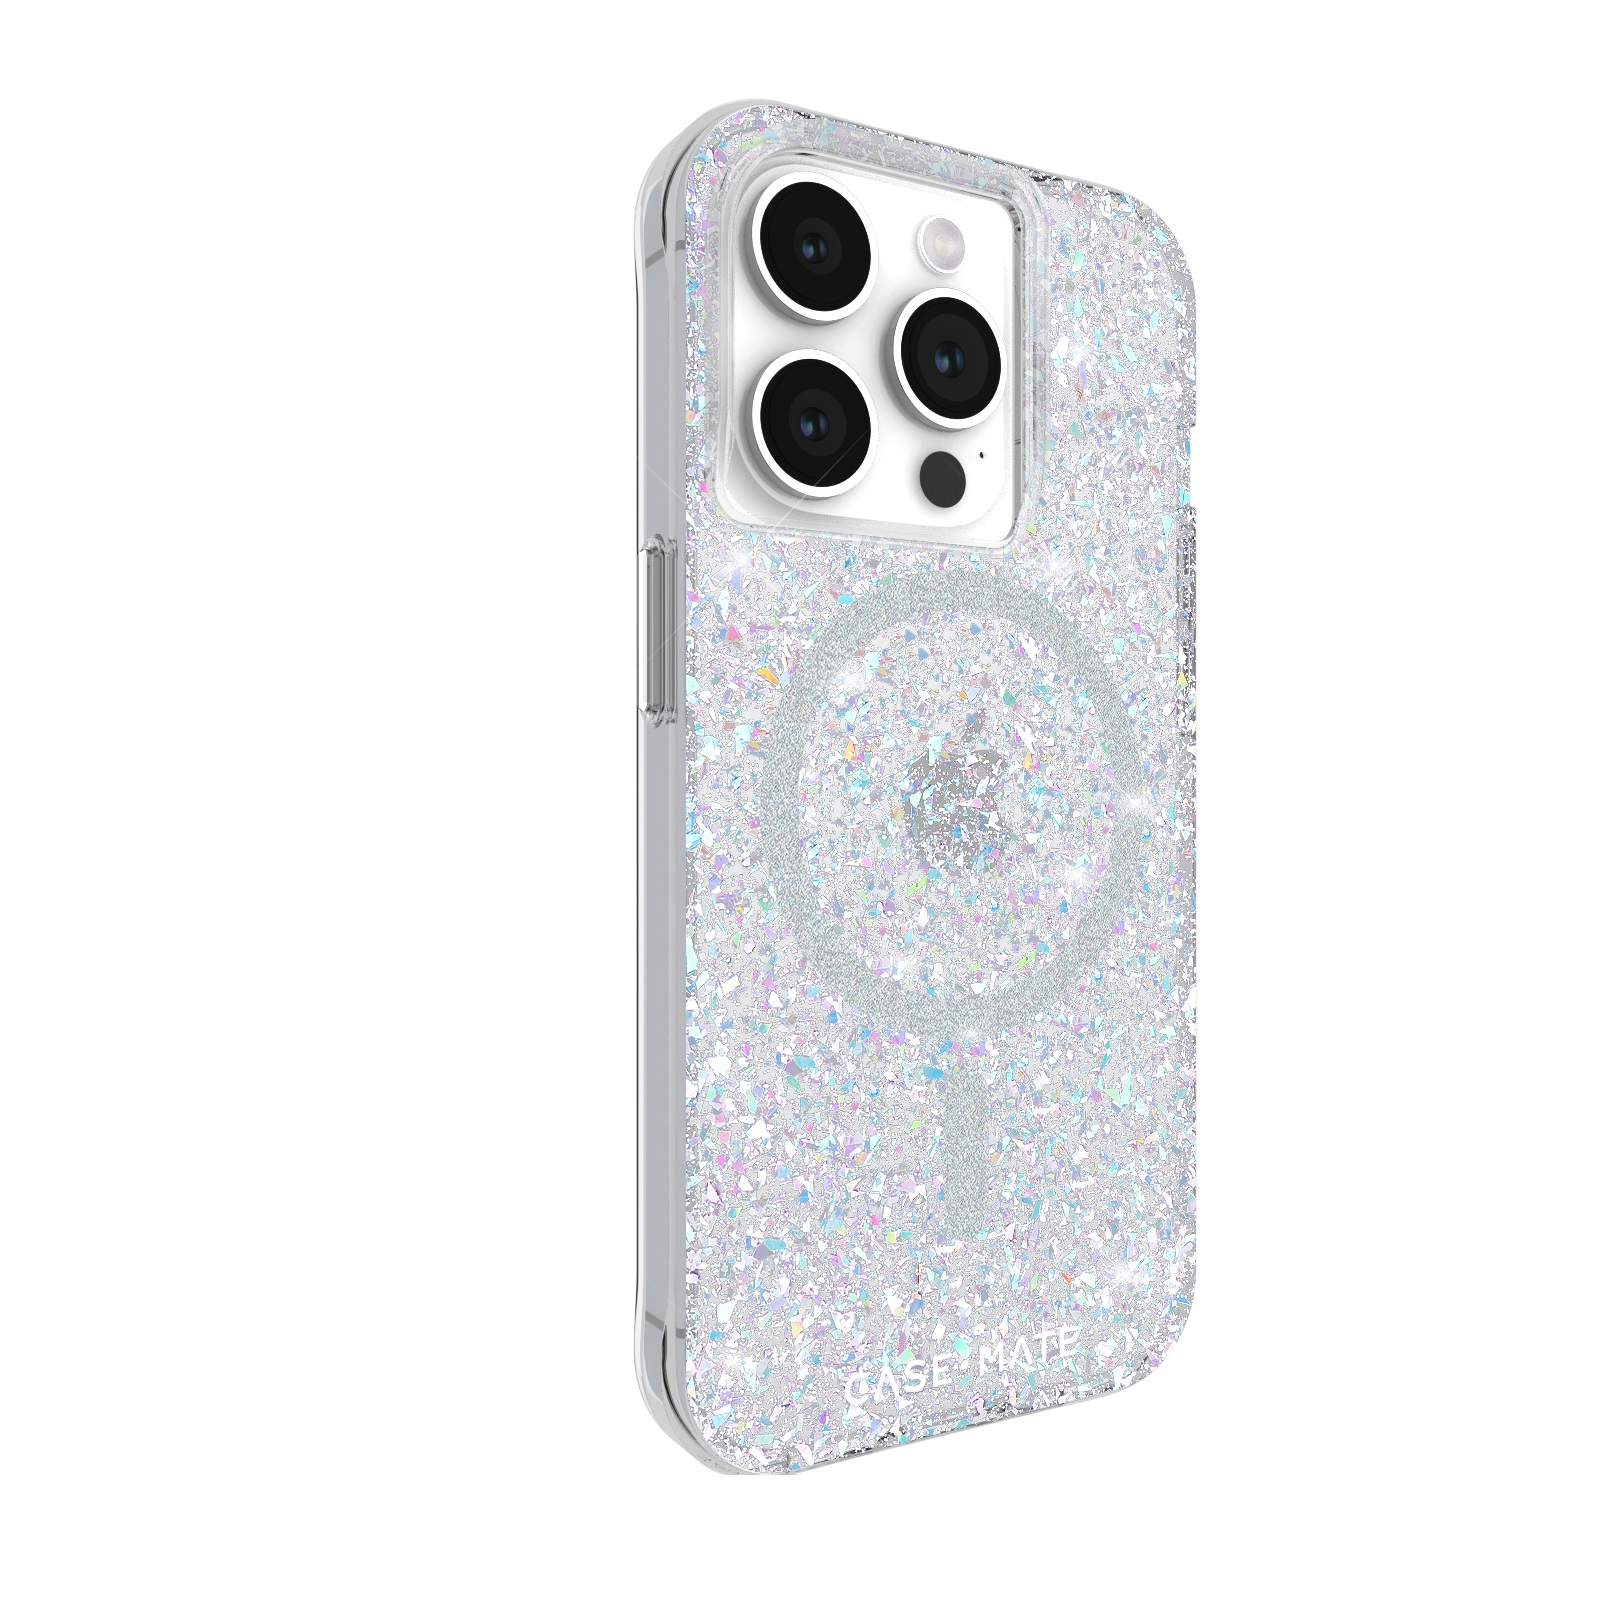 CASE-MATE Pro, 15 Backcover, Twinkle, Glitzer Apple, iPhone